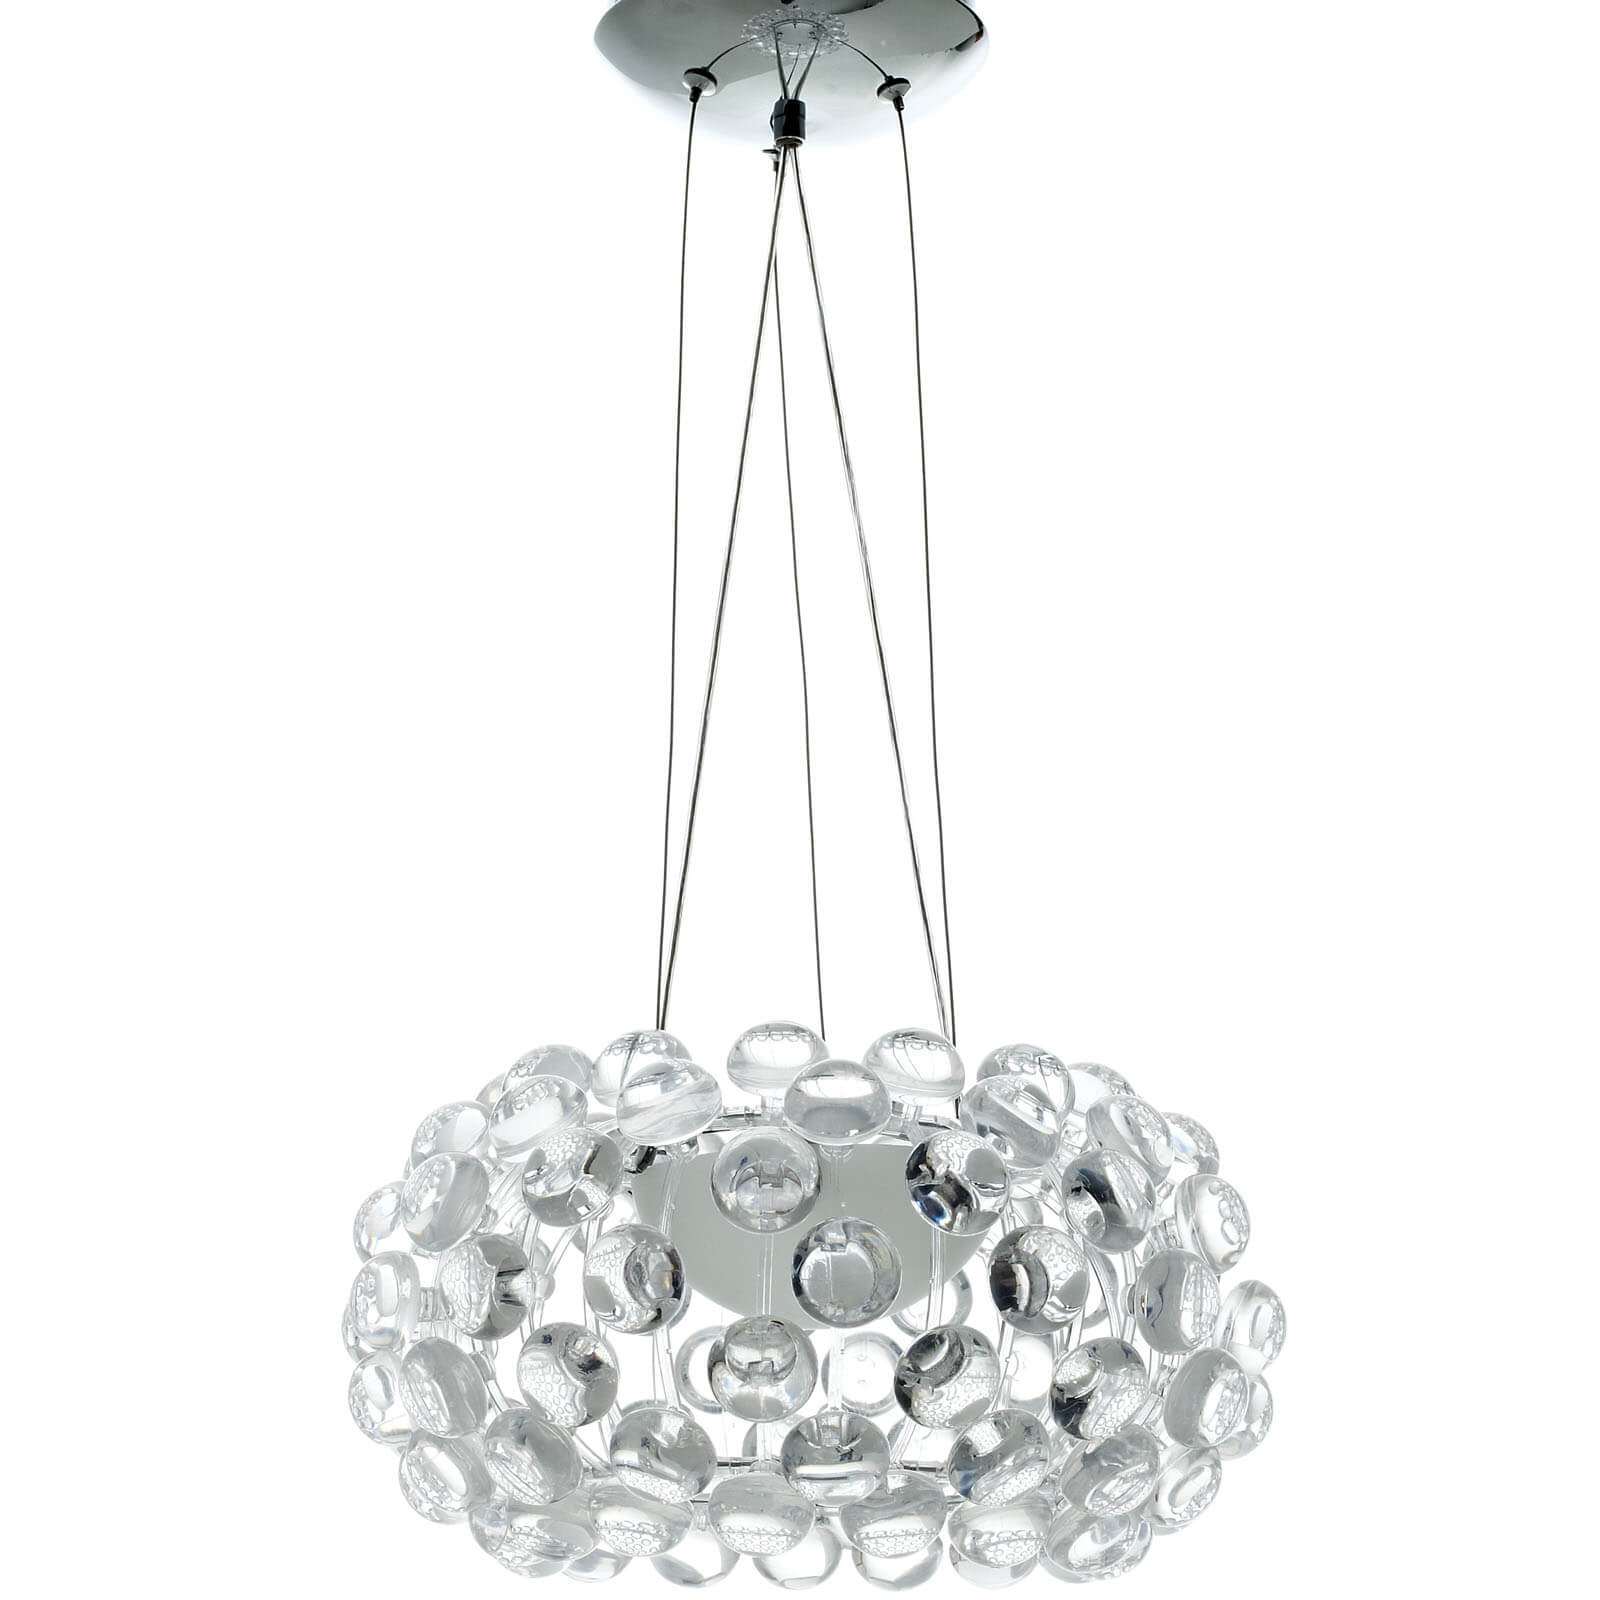 Suspended ceiling lights front view